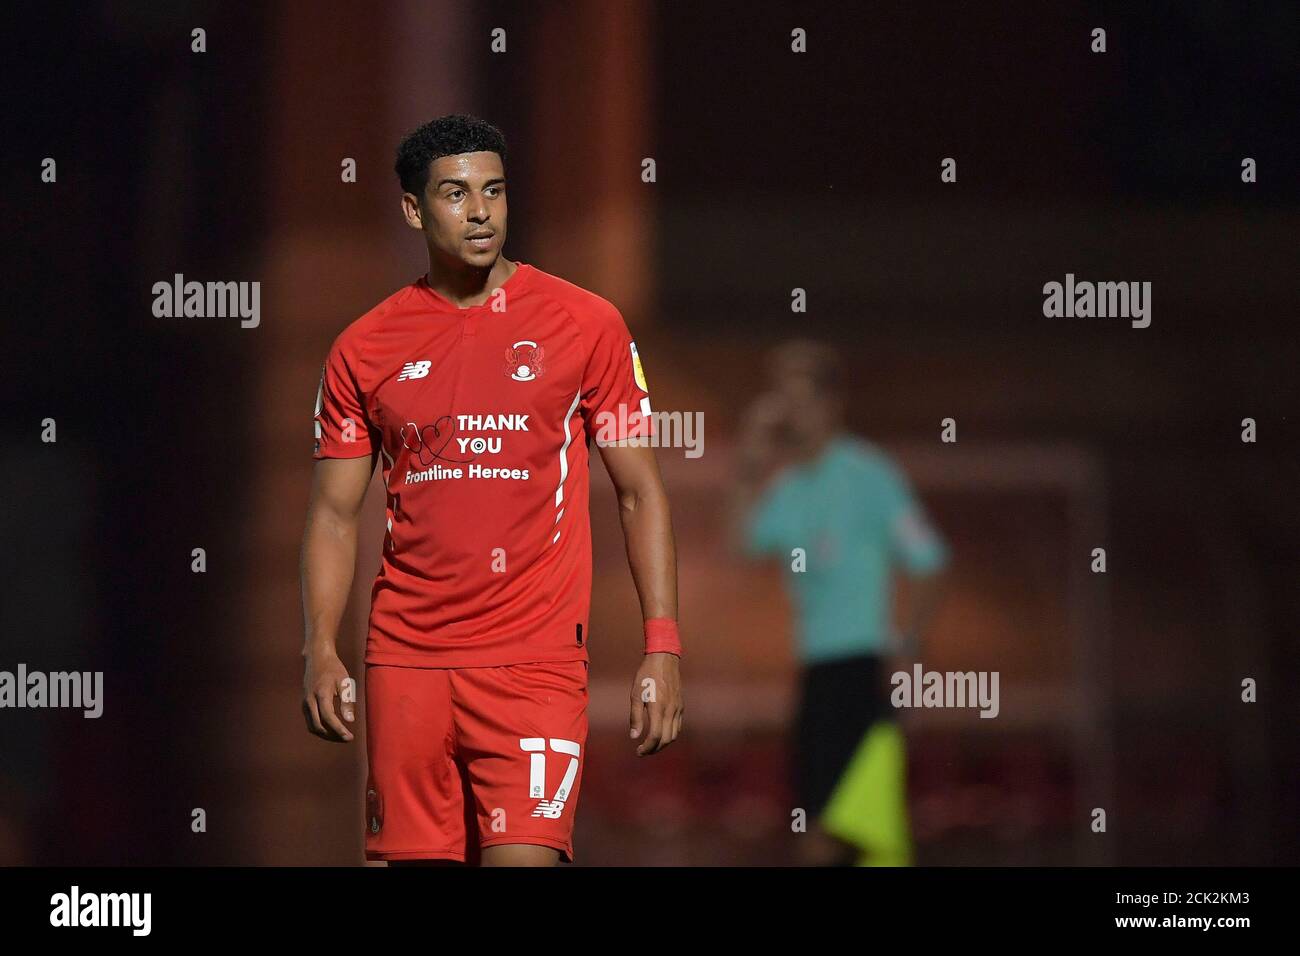 London, UK. 15th Sep, 2020. Louis Dennis of Leyton Orient during the Carabao Cup second round match between Leyton Orient and Plymouth Argyle at the Matchroom Stadium, London, England on 15 September 2020. Photo by Vince Mignott/PRiME Media Images. Credit: PRiME Media Images/Alamy Live News Stock Photo